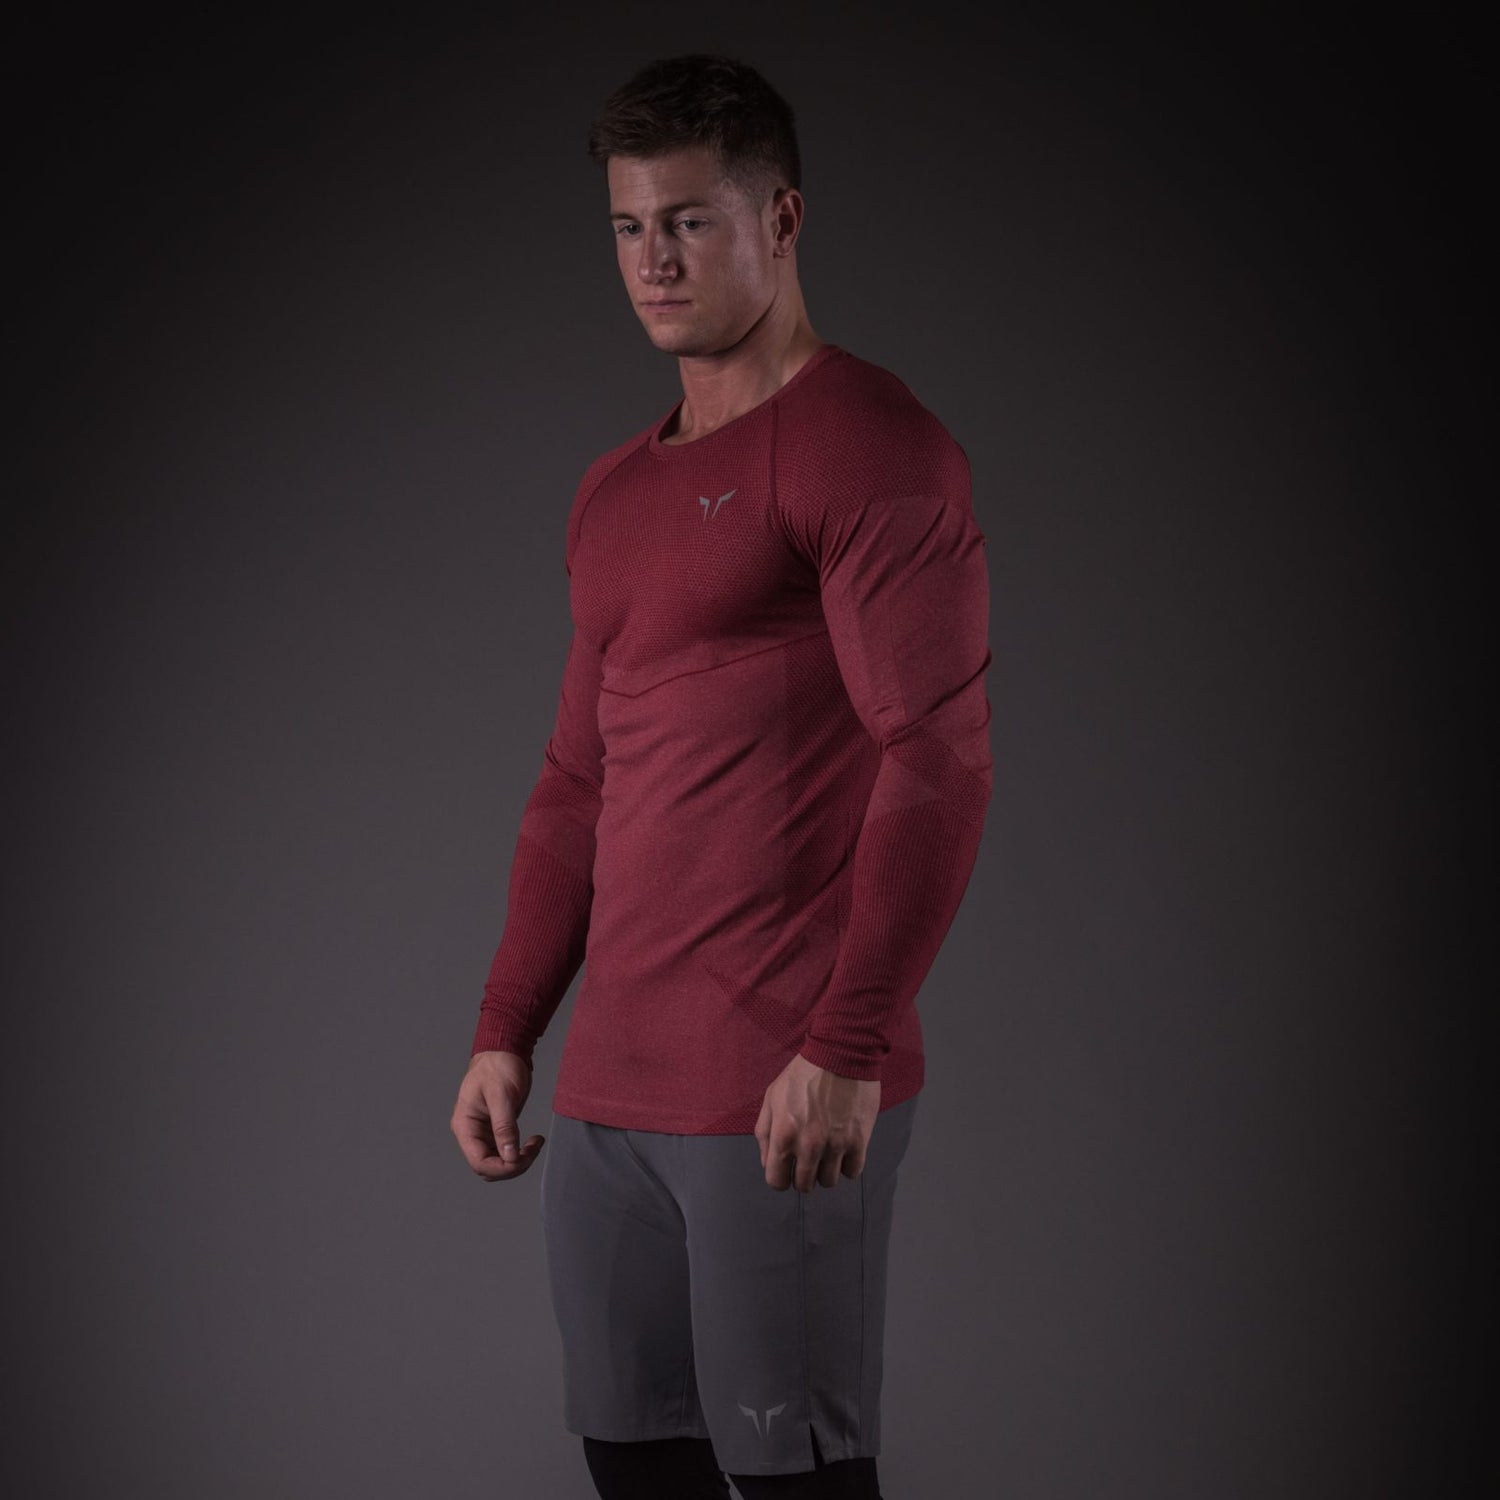 Ae Seamless Dry Knit Tee Bali Red In Full Sleeves Squatwolf